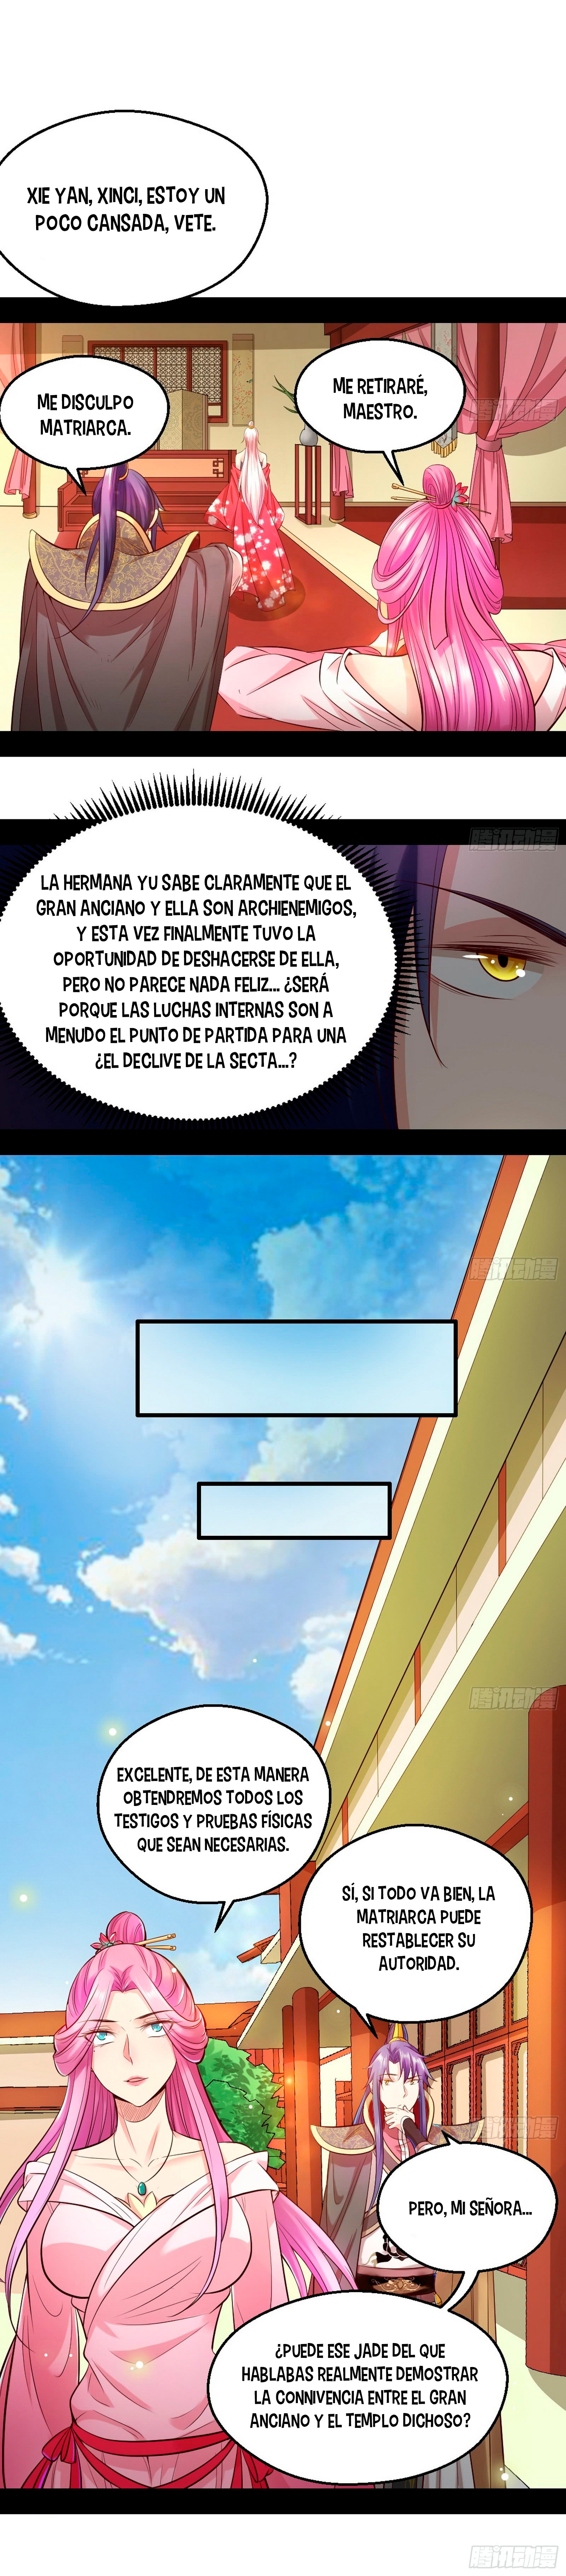 Manga Soy un dios maligno Chapter 45 image number 7